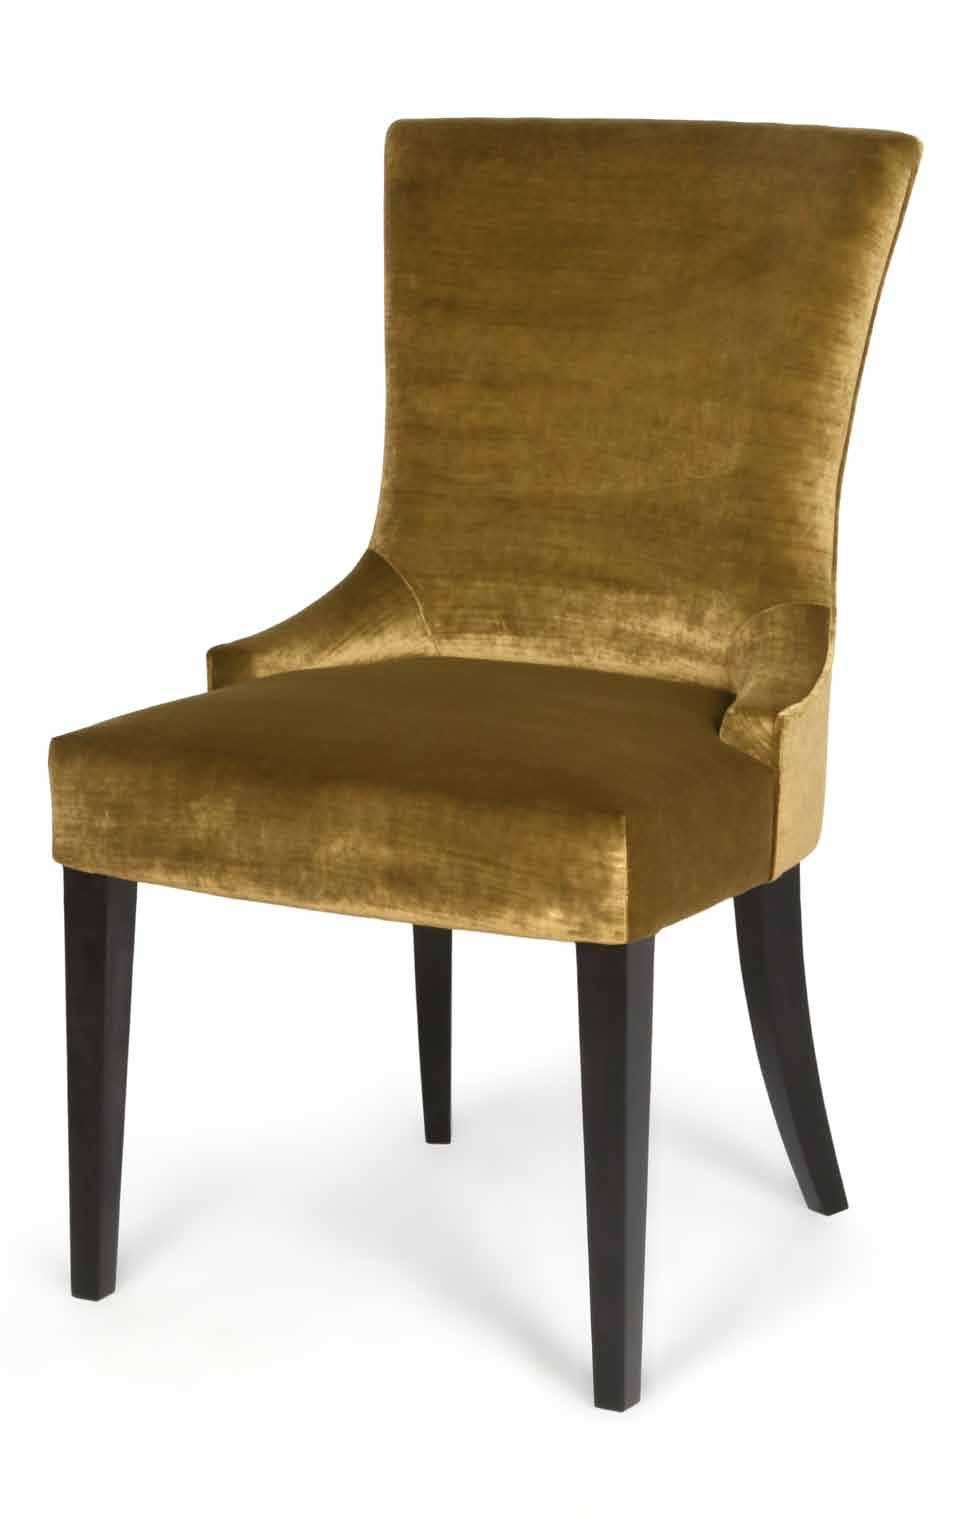 DINING CHAIRS Our dining chairs are made individually which enables the Alter